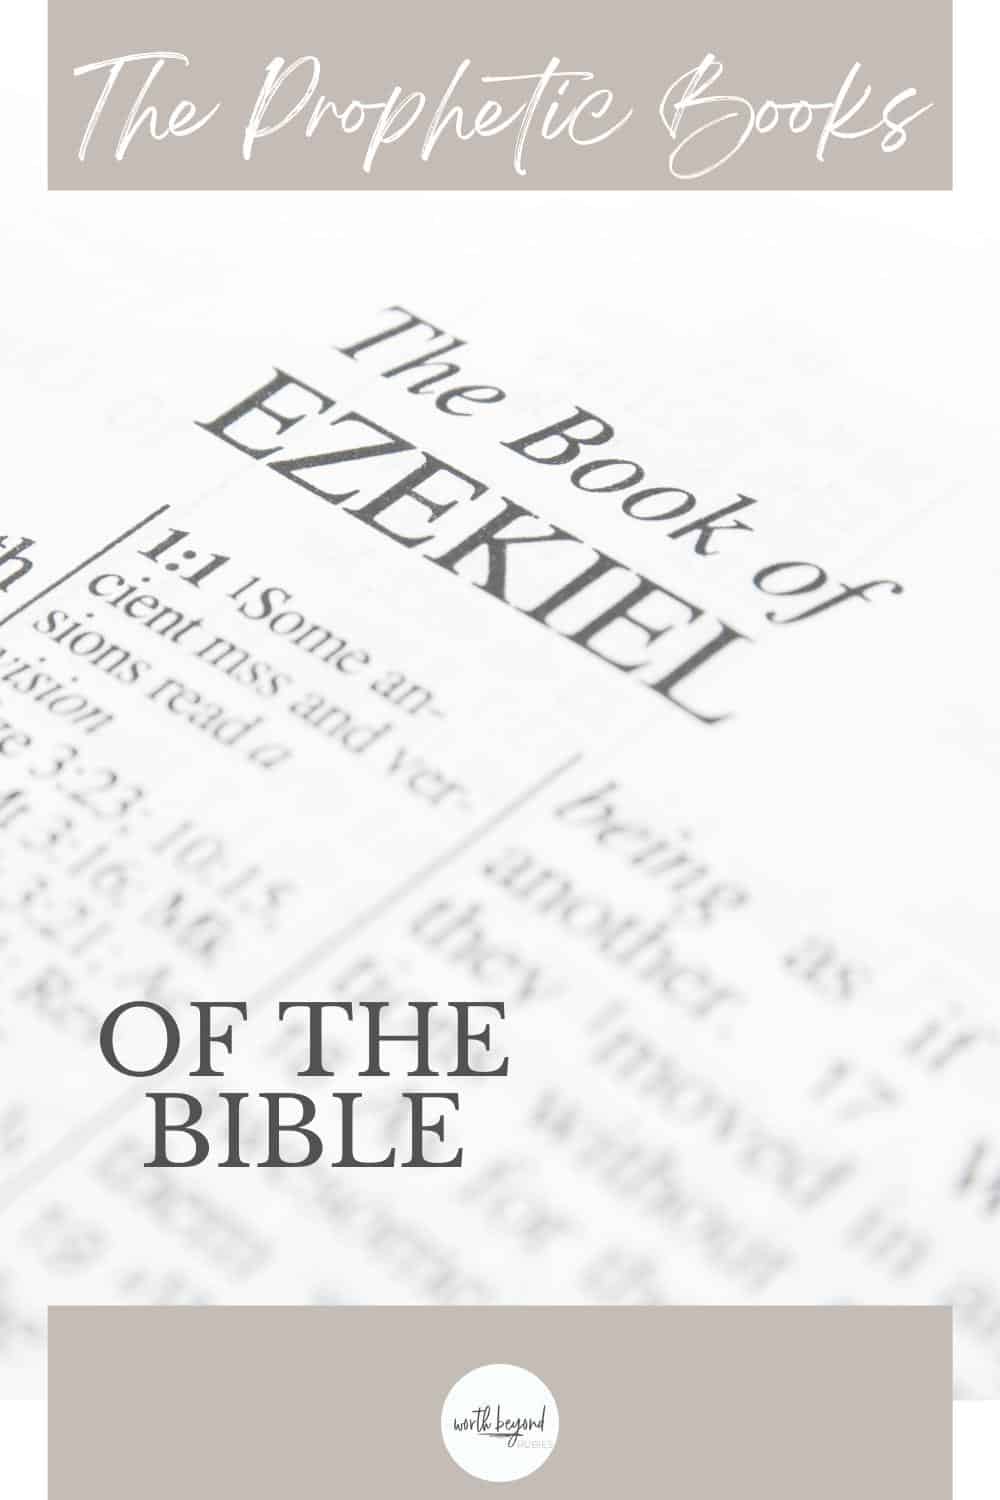 An image of the title page of the Book of Ezekiel in the Bible and text overlay that says The Prophetic Books of the Bible and the Worth Beyond Rubies logo at the bottom